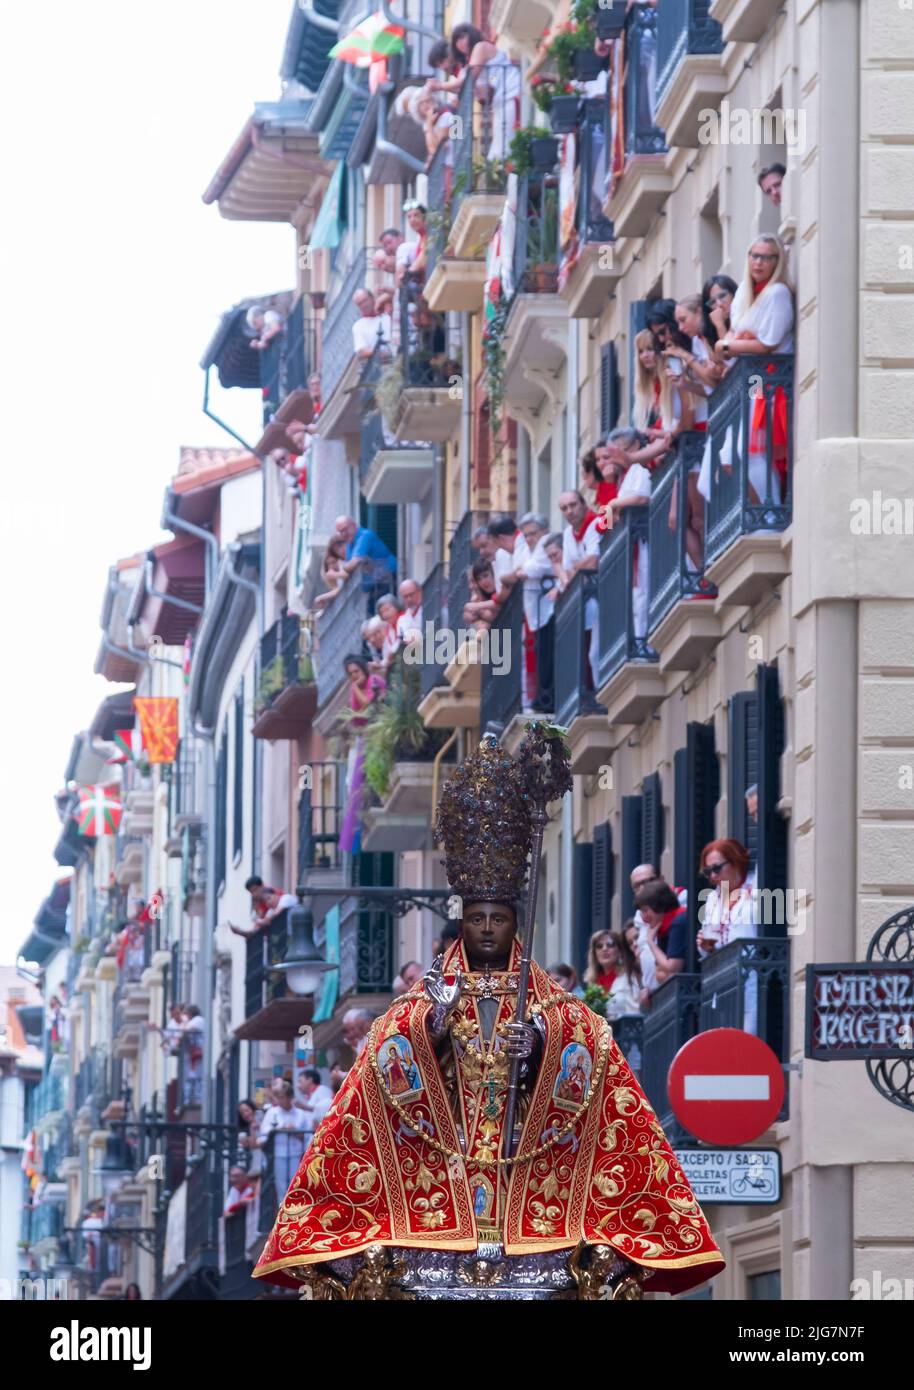 Image of San Fermin in the traditional procession of the saint and people on the balconies in the main street. July 07, 2022. Pamplona, Navarra, Spa Stock Photo